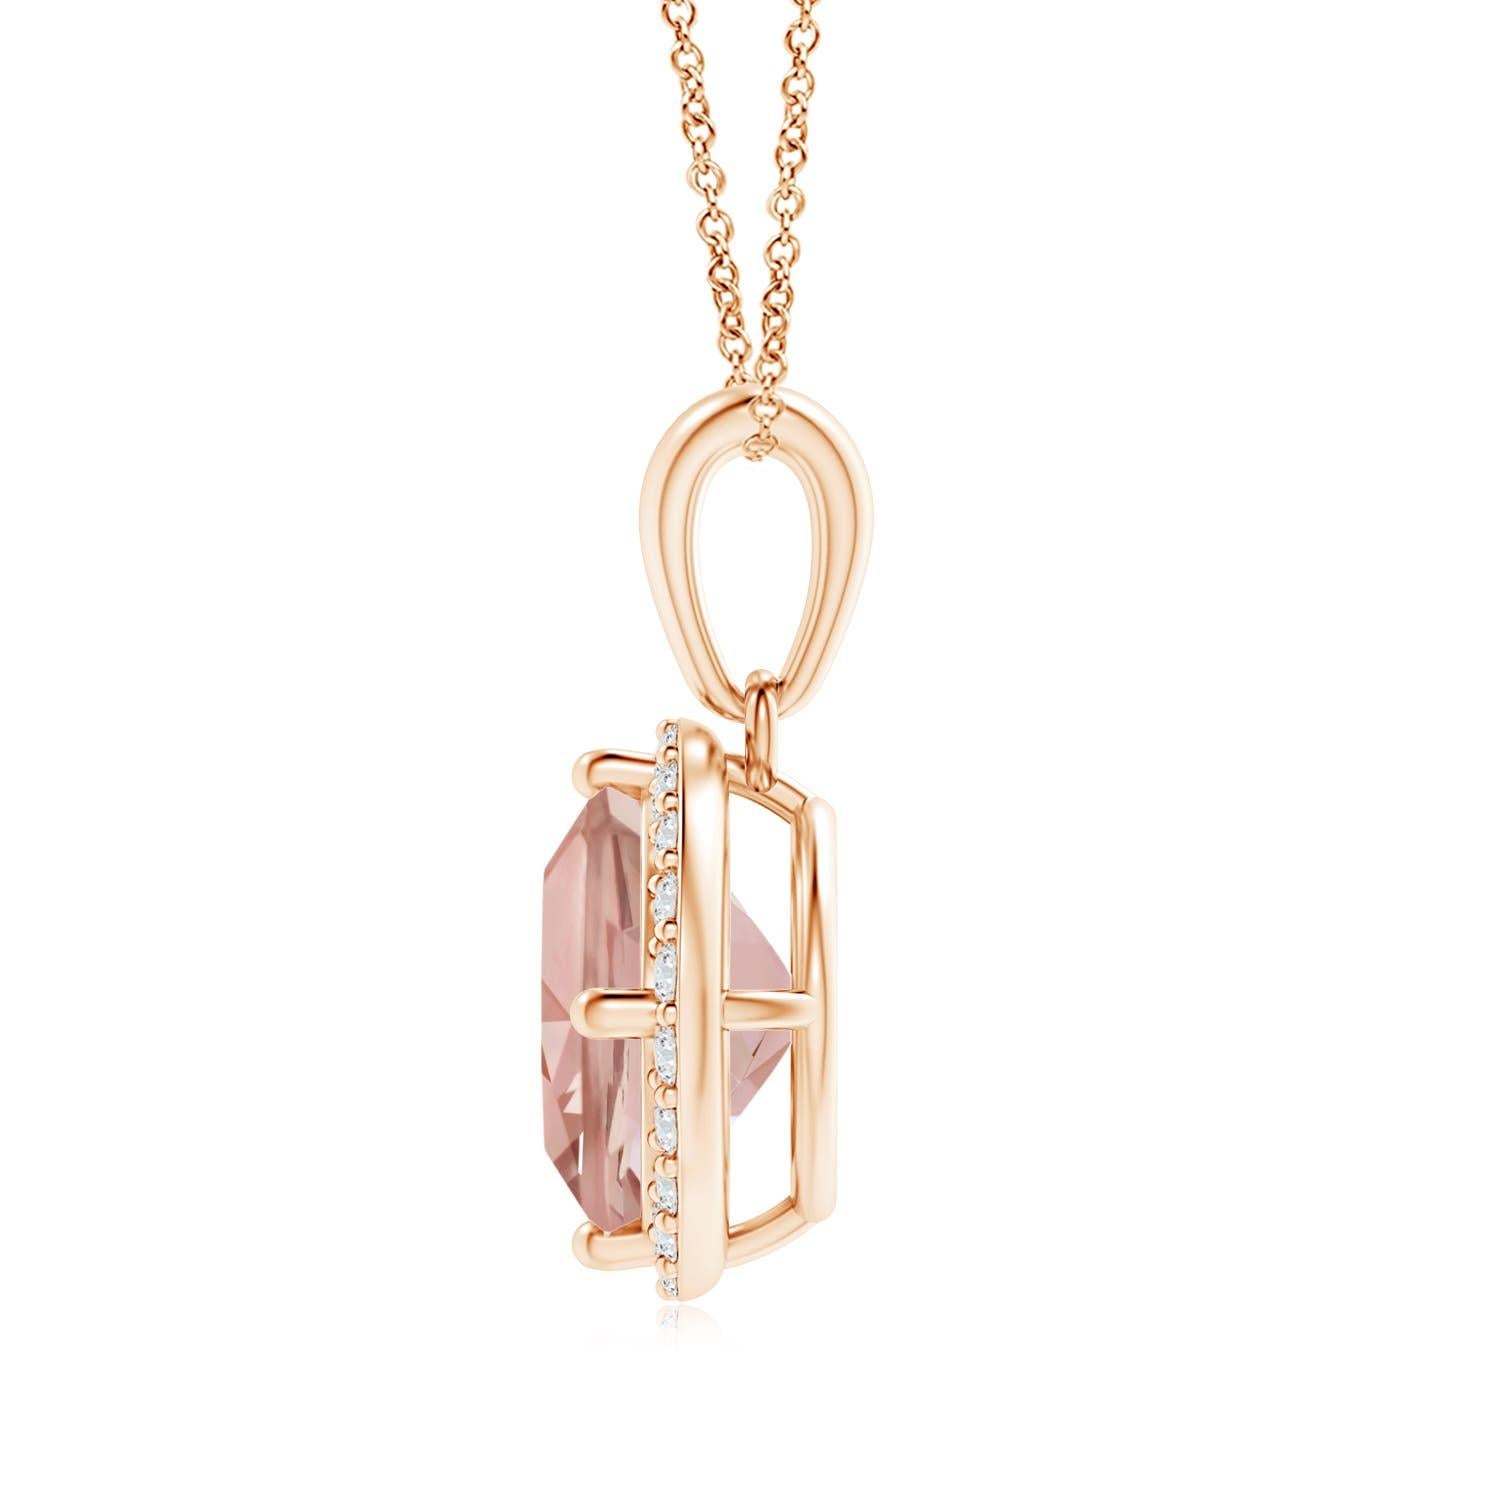 Hanging from a plain lustrous bale, this morganite and diamond halo pendant in 18k rose gold exudes a distinctive appeal. The cushion morganite is secured sideways in a claw prong setting and surrounded by a halo of diamond accents.
